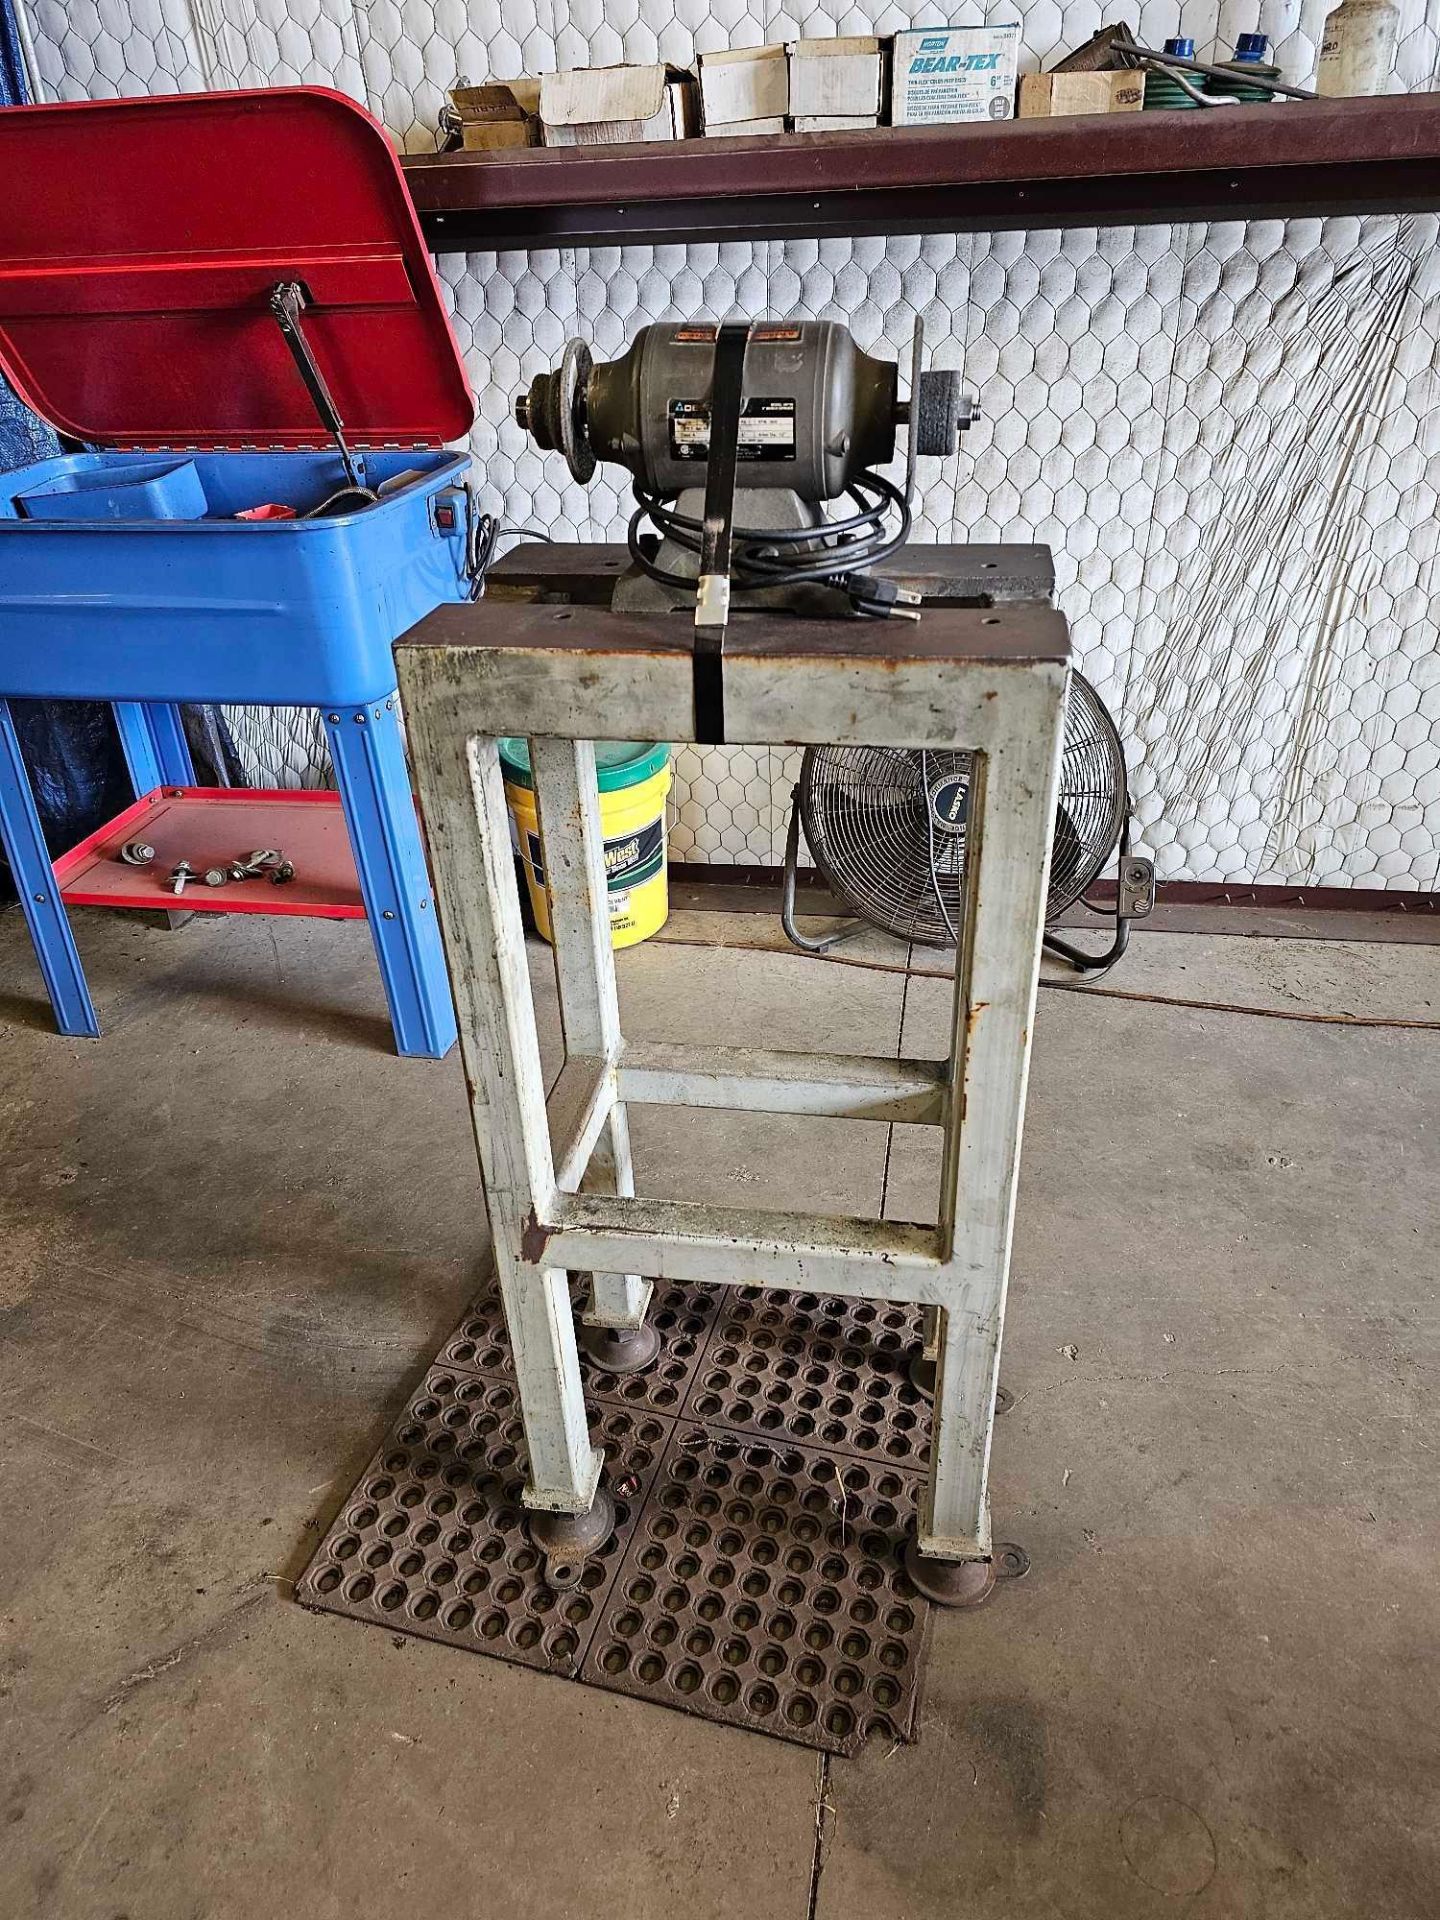 DELTA SHOPMASTER 6" BENCH GRINDER WITH STAND - Image 4 of 7